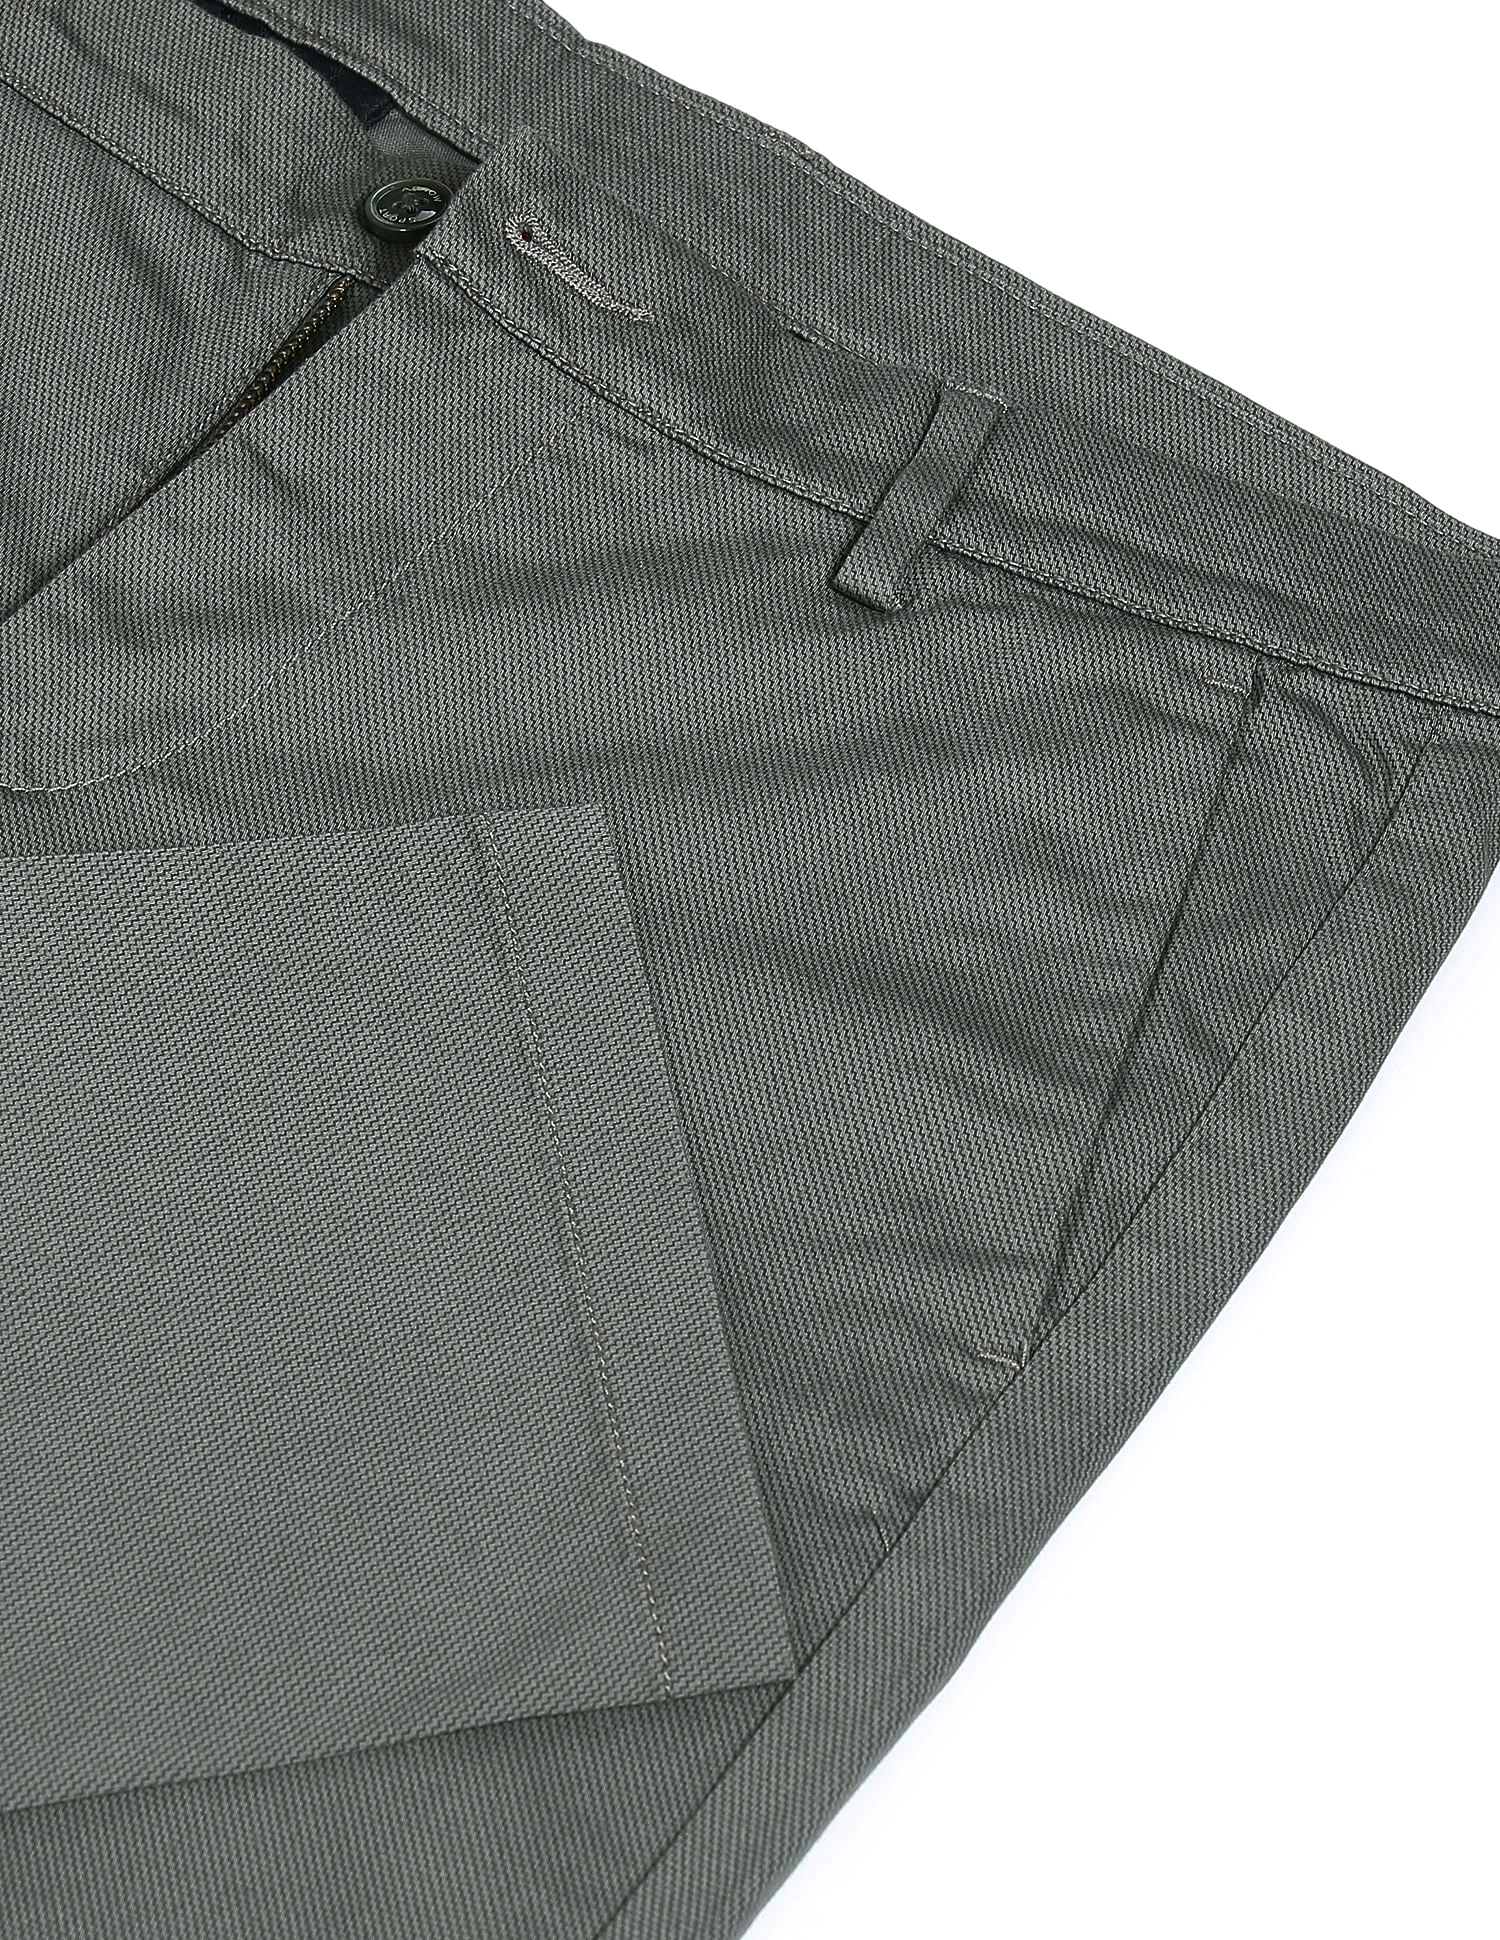 Gray Super 100s Pants, trousers | Peter Christian